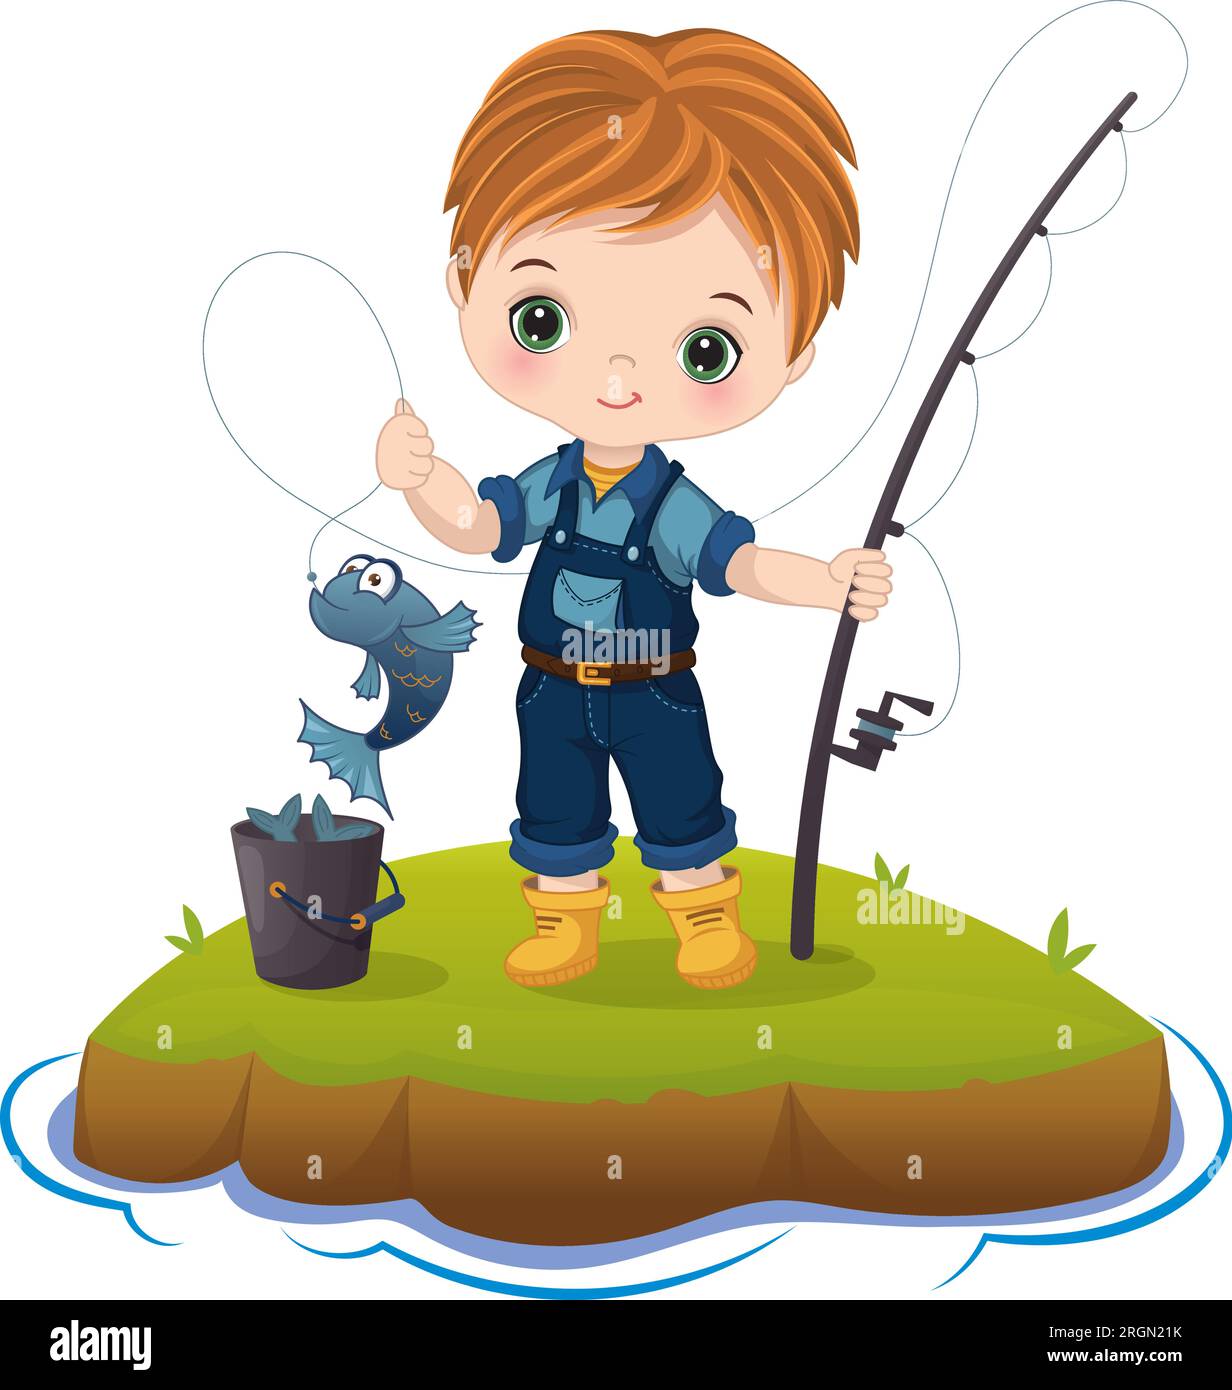 Boy catching fish Stock Vector Images - Alamy